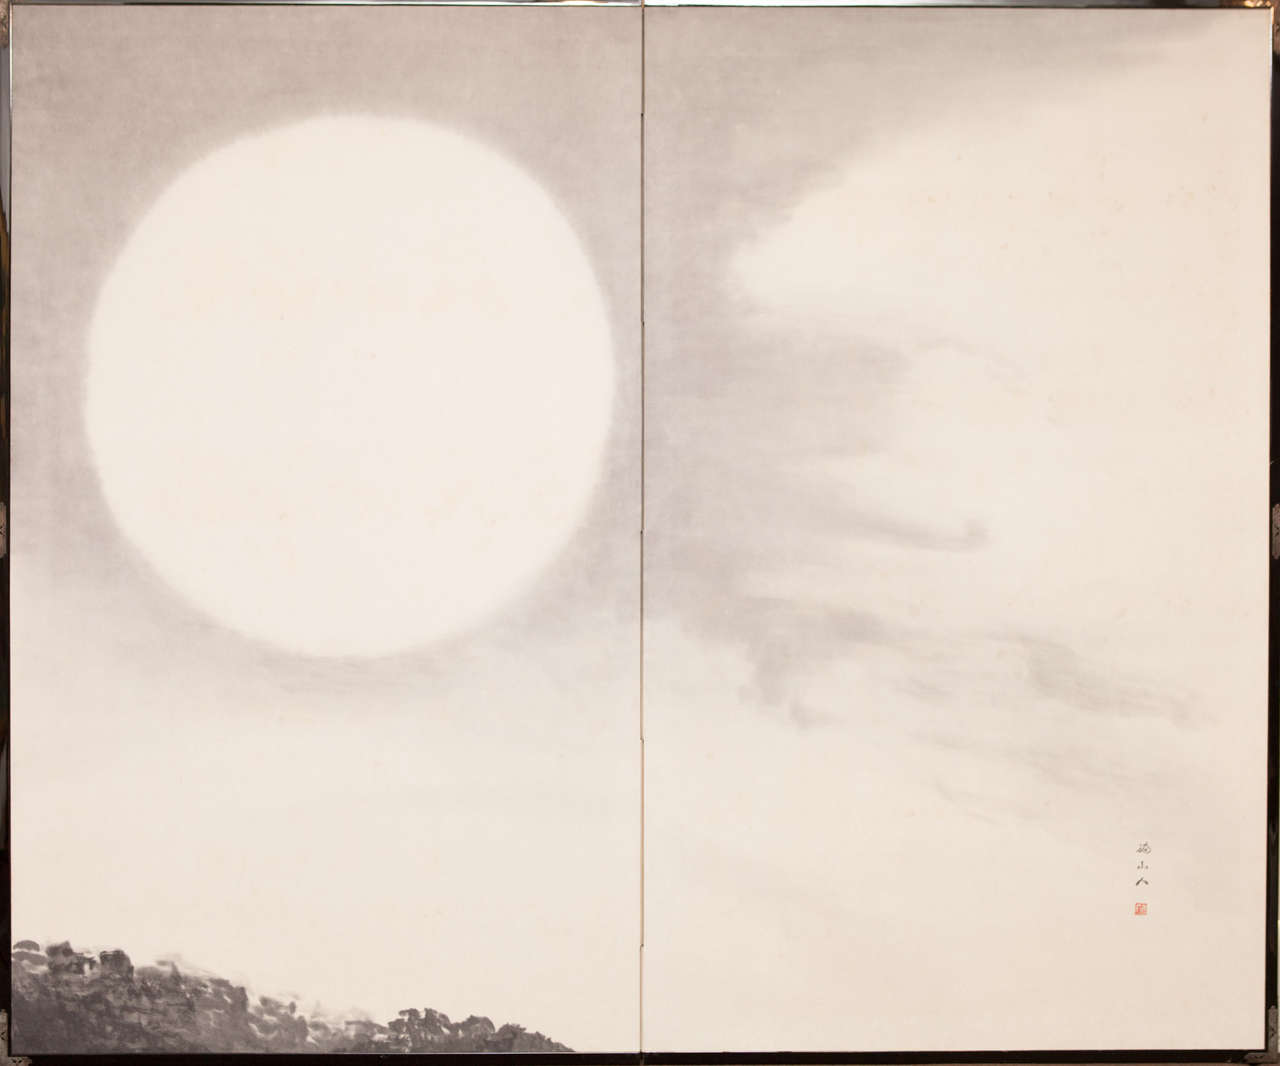 Japanese Two Panel Screen: Moonlit Sky, Showa period (1926 - 1989) minimal ink painting (sumi-e) on mulberry paper with a very modern composition and feeling.  The 1950s marked a big change for Japanese artists as they became very open to Western